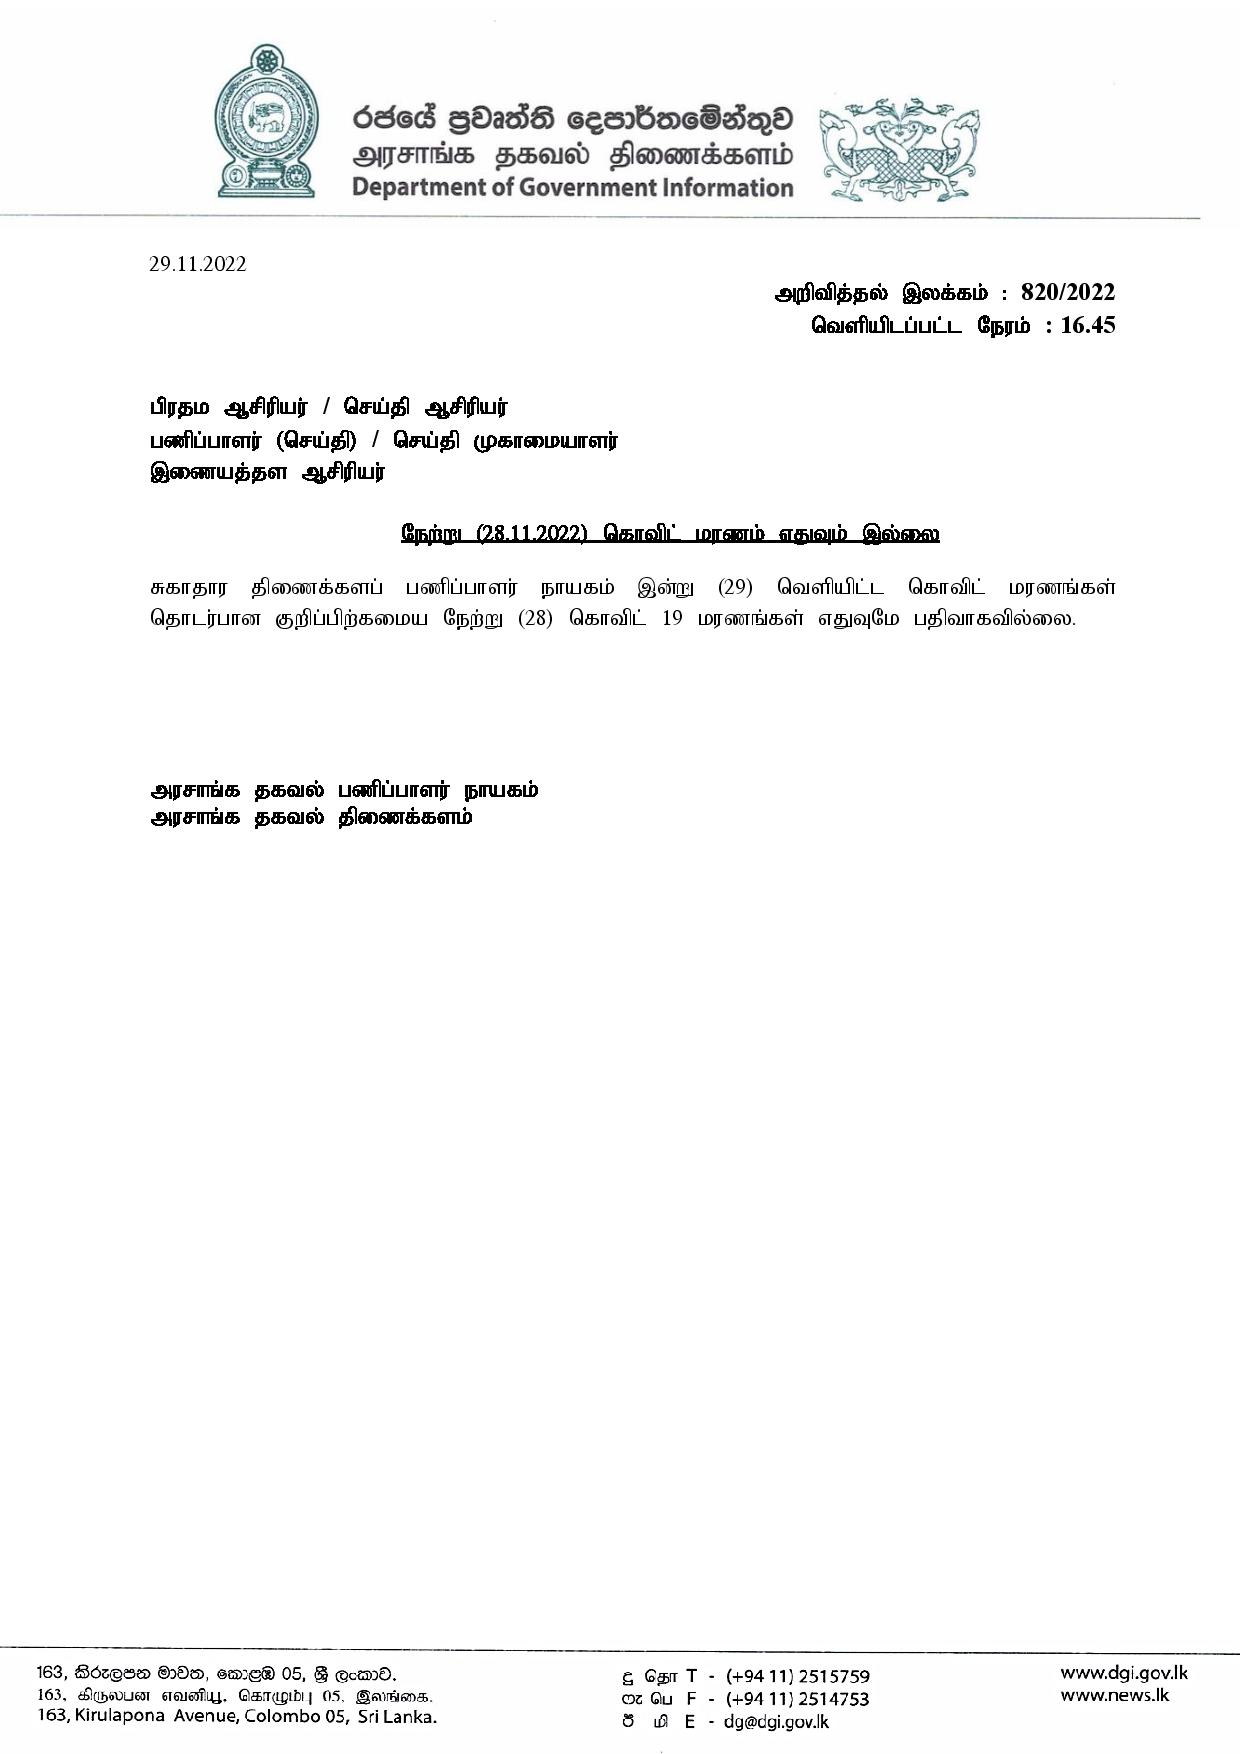 Release No 820 Tamil page 001